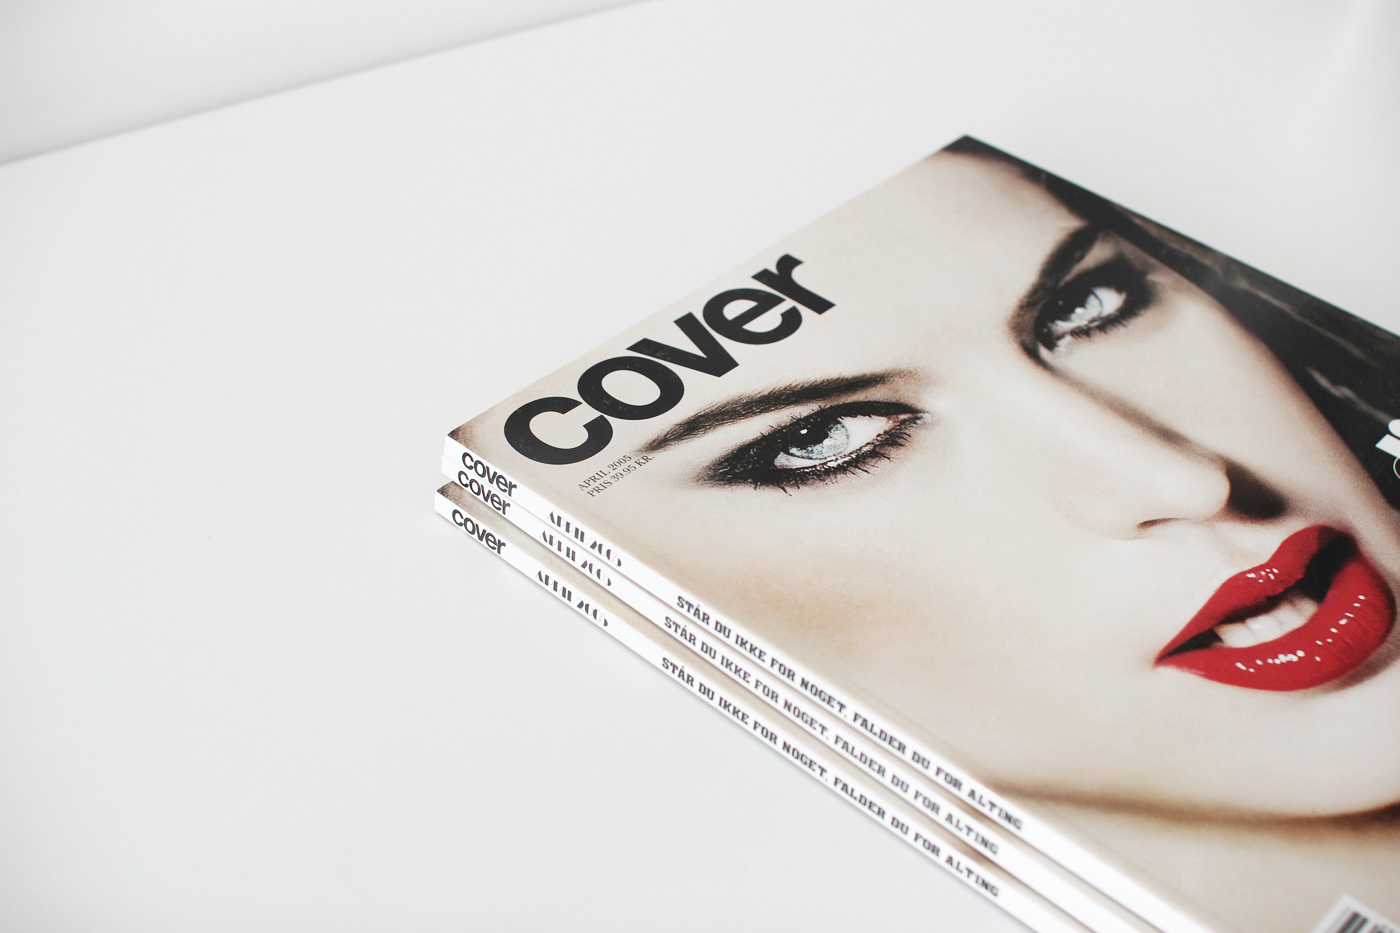 Cover magazine – covers